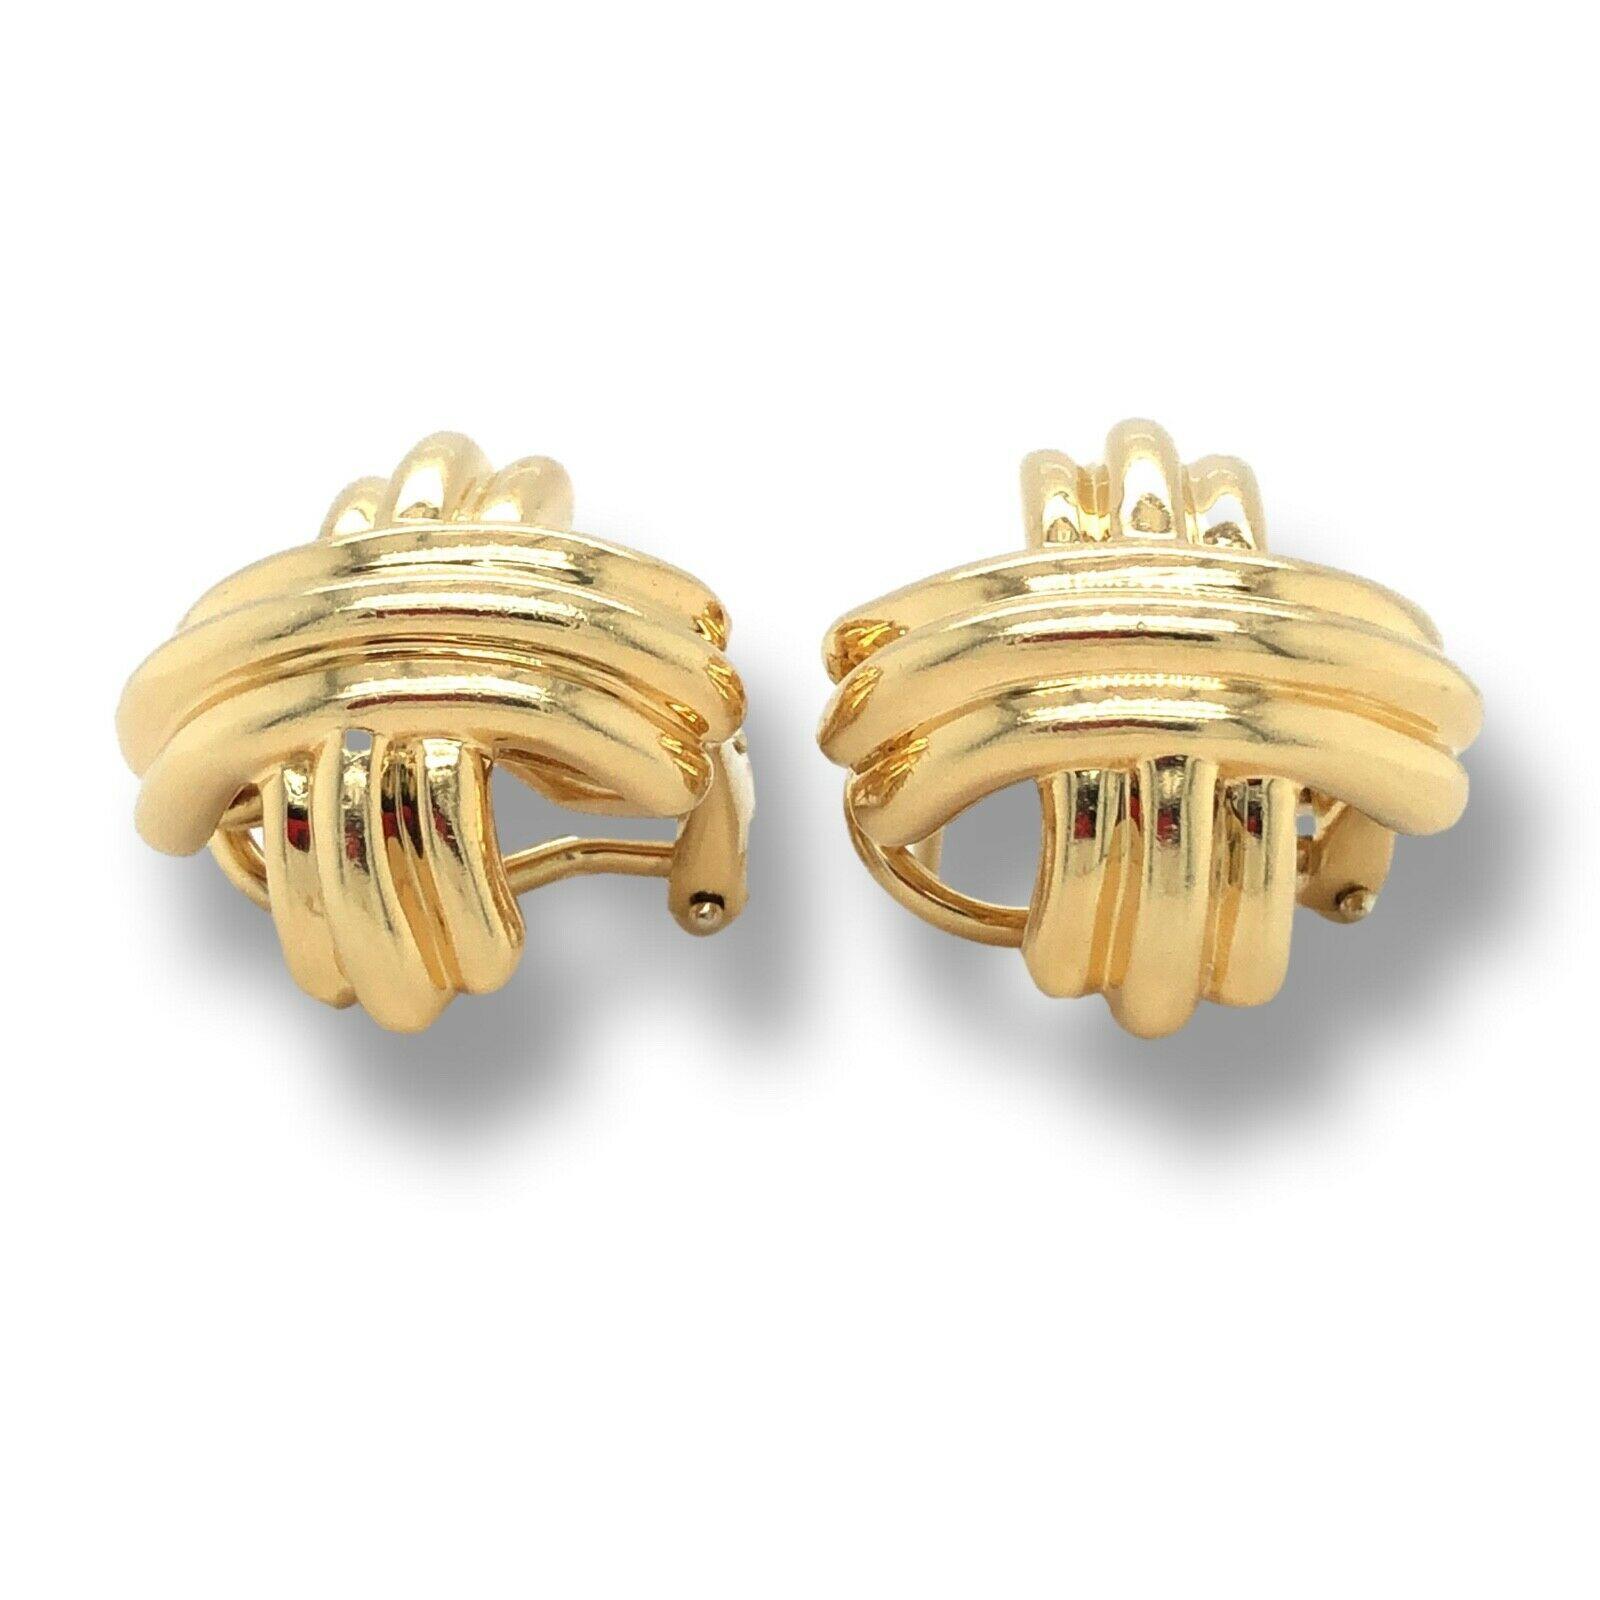 Tiffany & Co. vintage pair of signature X earrings finely crafted in 18 Karat yellow gold with omega clip backs and posts. Medium size. Posts can be removed upon request  

Stamp: T&CO. 750
Measurements: 16mm
Weight: 13.1 grams

Comes in Blue